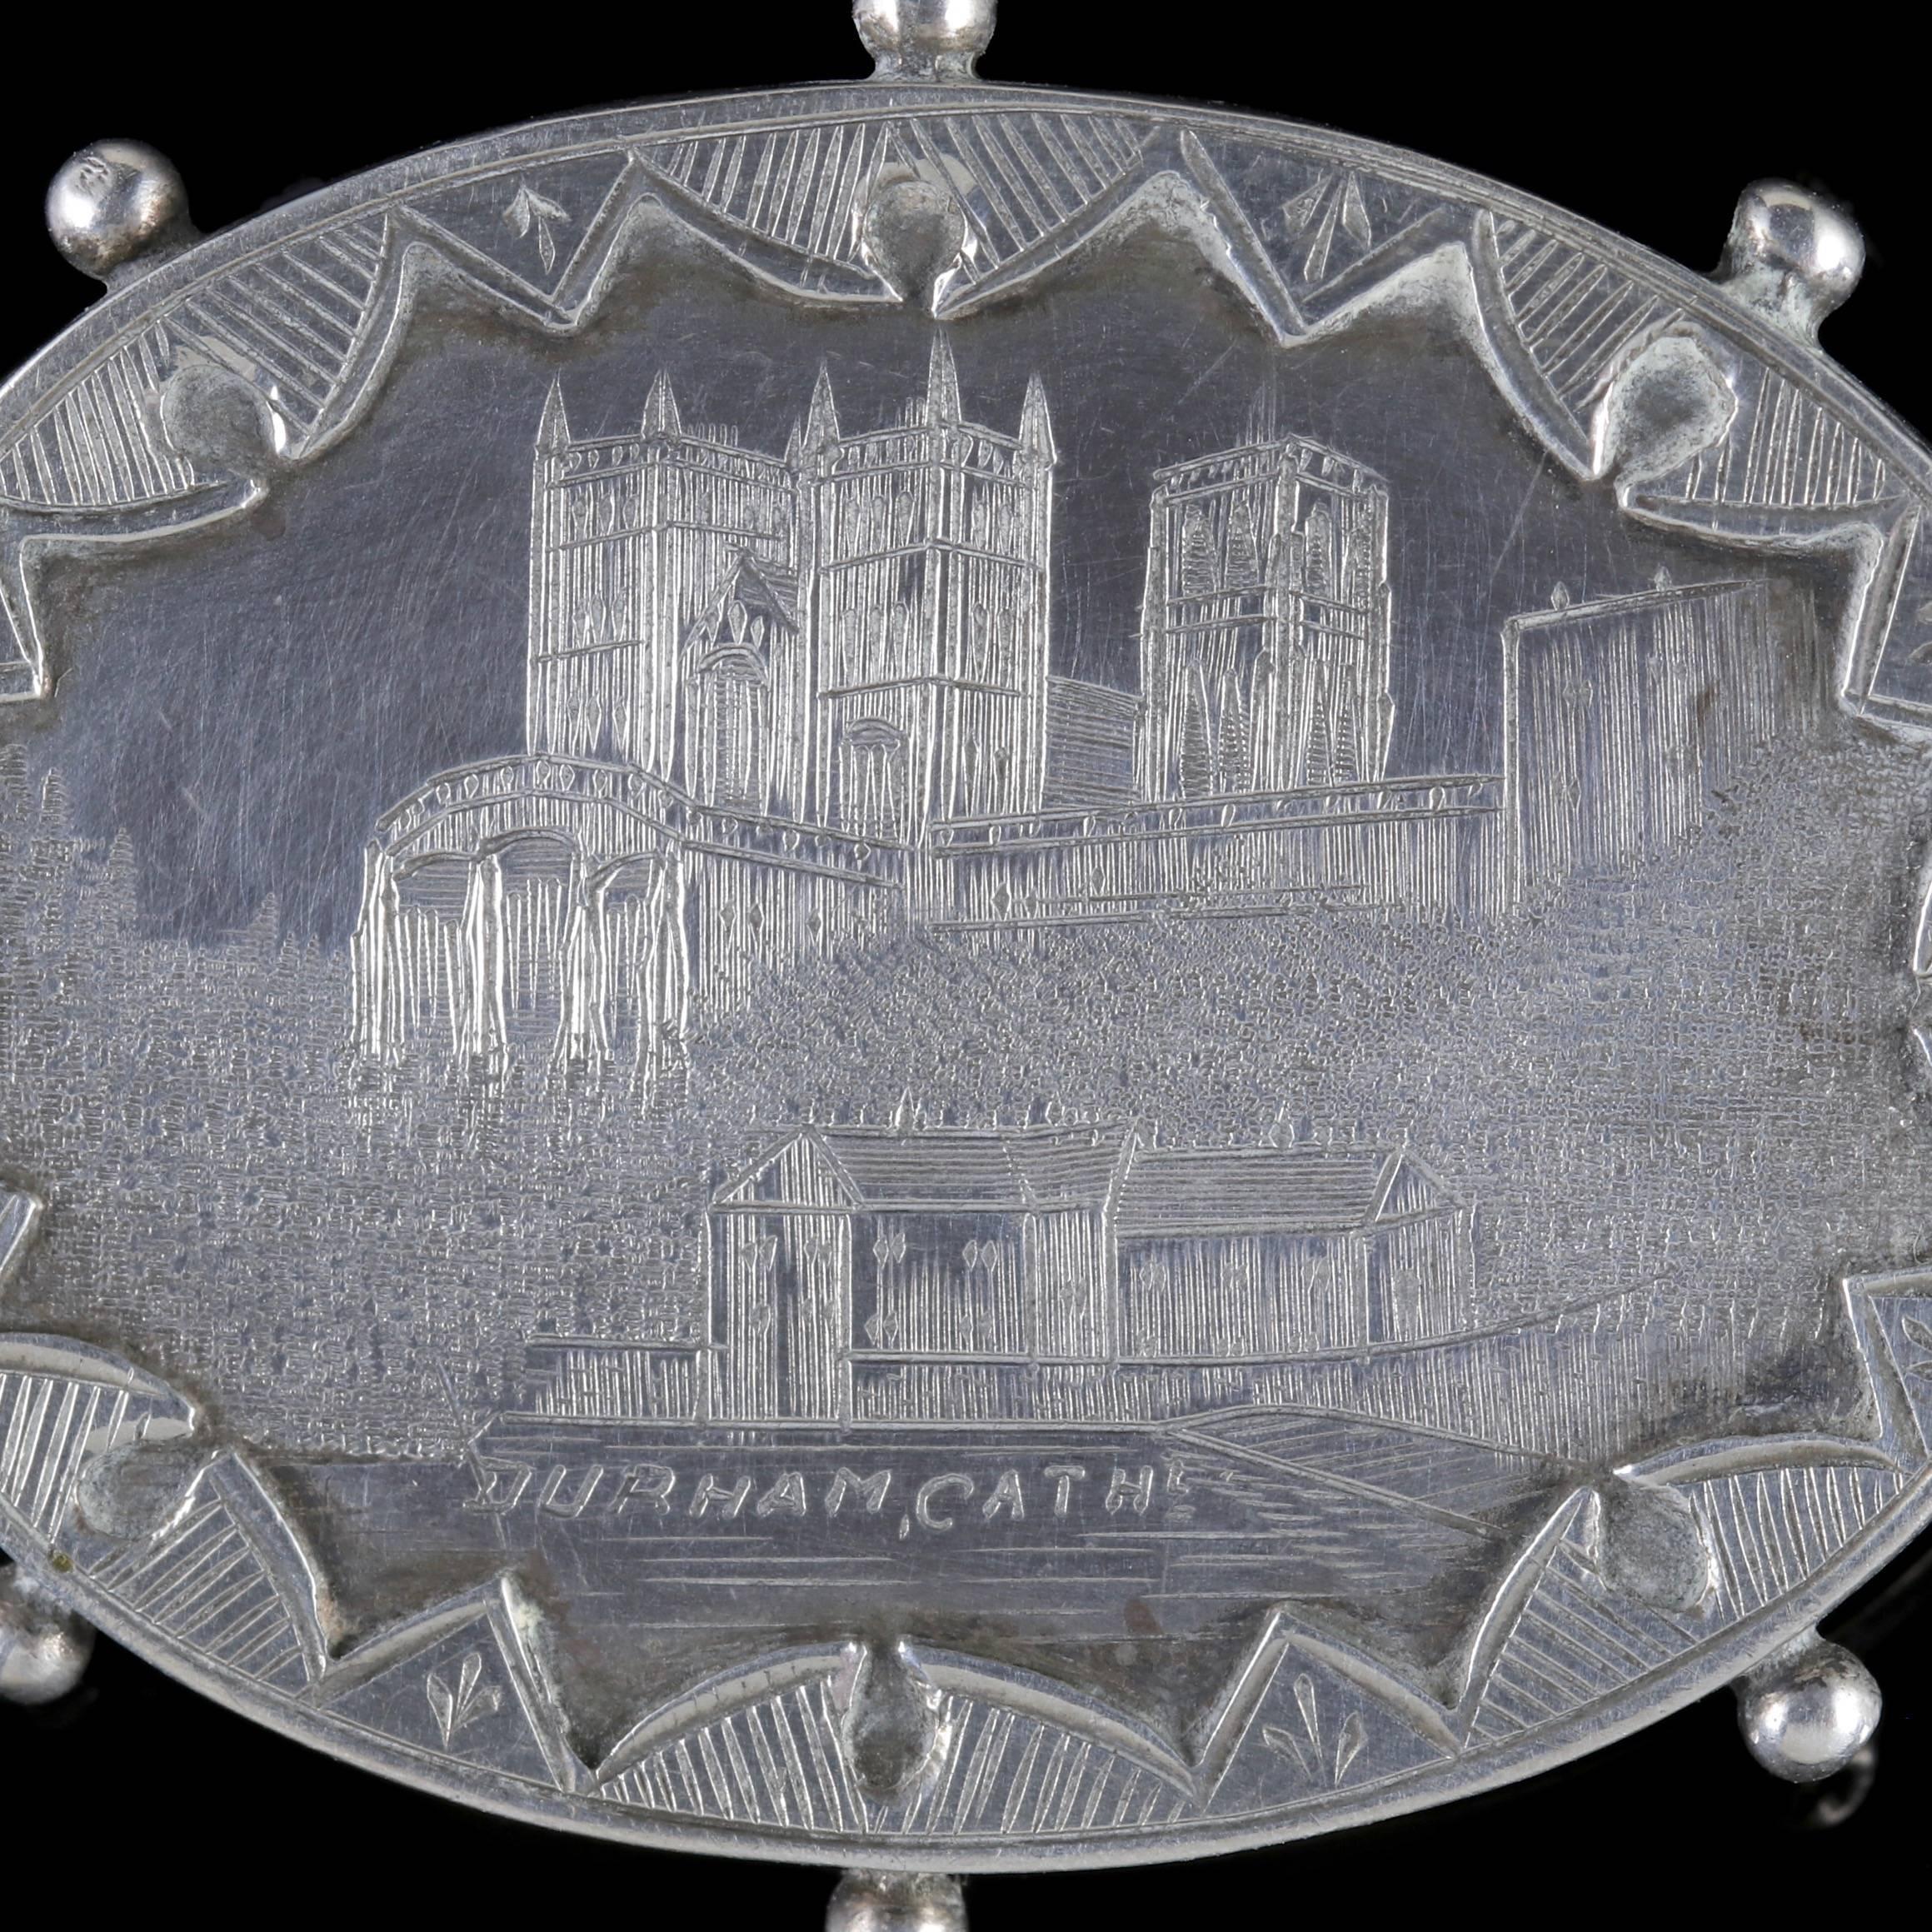 This wonderful antique Victorian Sterling Silver brooch is dated Birmingham 1893.

The brooch depicts a beautiful engraved image of Durham Cathedral with intricate detailing applied. 

All set in Sterling Silver and fitted with a secure pin and